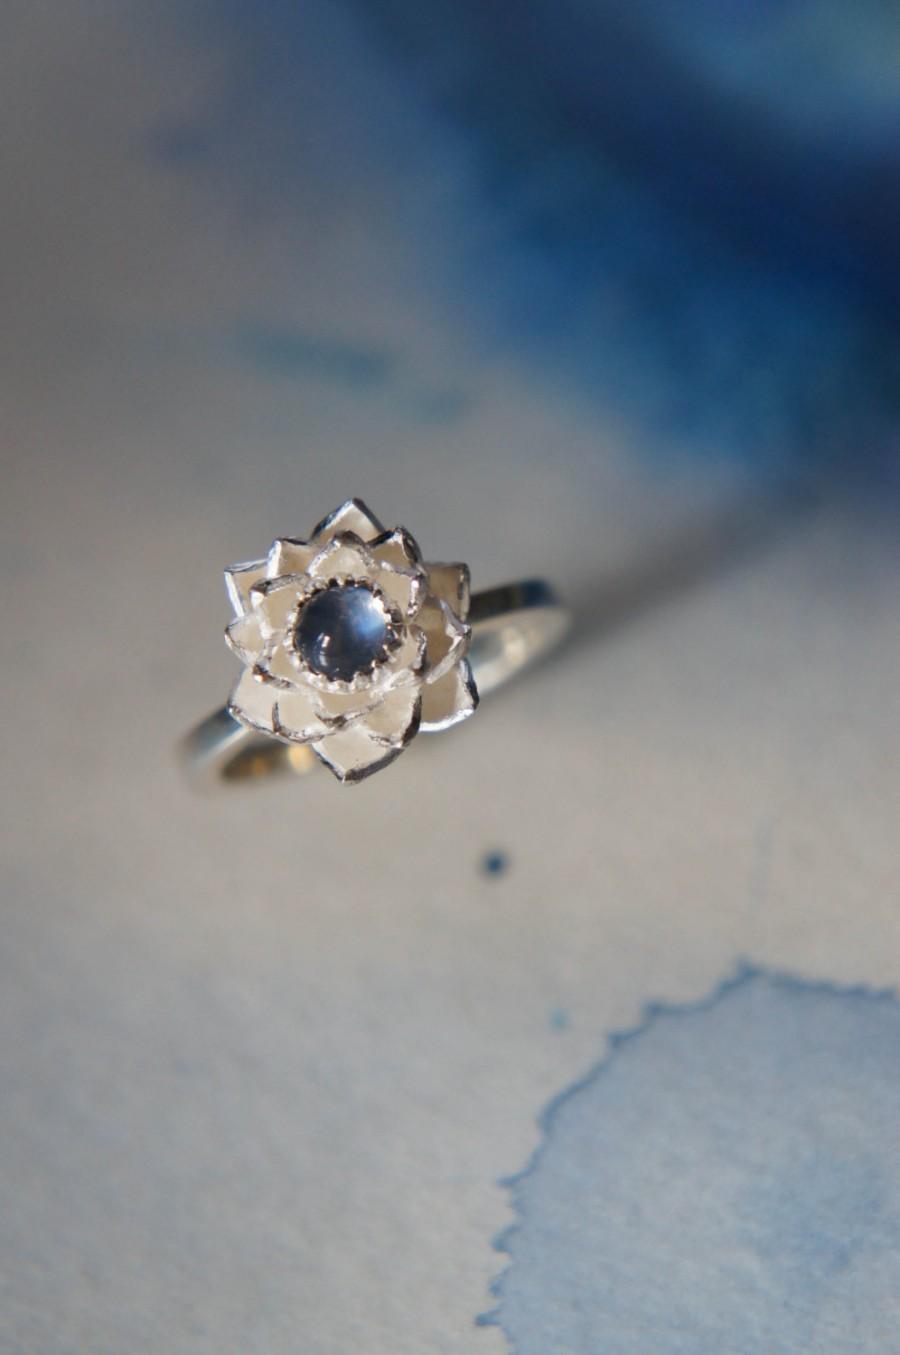 Mariage - Lotus ring, blue moonstone ring, sterling silver ring, flower ring, engagement ring, proposal ring, promise ring, floral jewelry, romantic